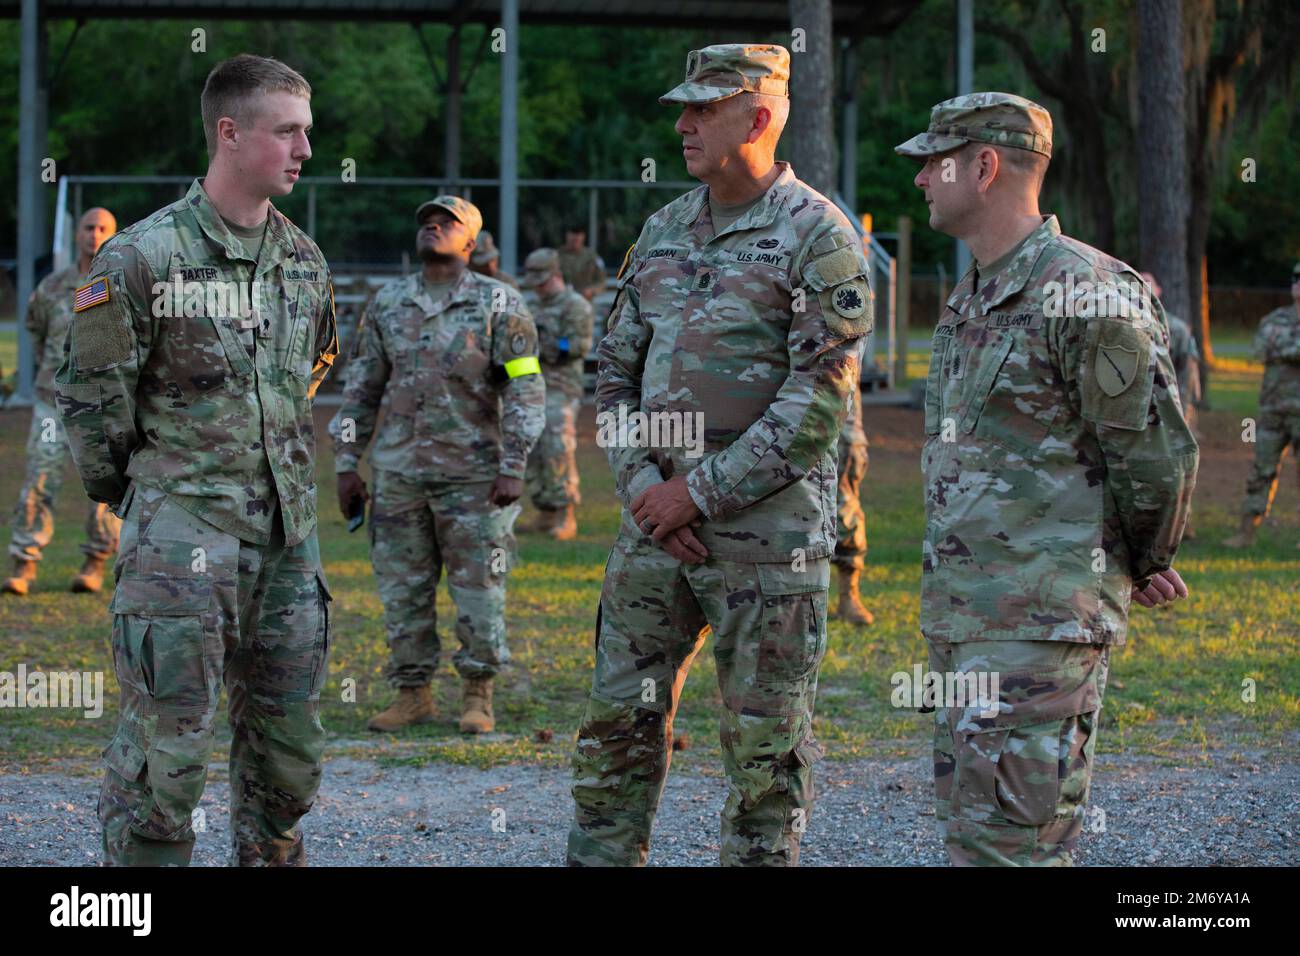 U.S. Army Command Sgt. Major Jeff Logan, the Georgia Army National Guard Command Sgt. Major, center, speaks to Spc. Keenan Baxter, representing the Georgia Army National Guard, left, during the Best Warrior Competition on Camp Blanding, Fla., May 10, 2022. The Regional Best Warrior Competition highlights the lethality, readiness and capabilities of Army National Guardsman throughout the southeastern region. Stock Photo